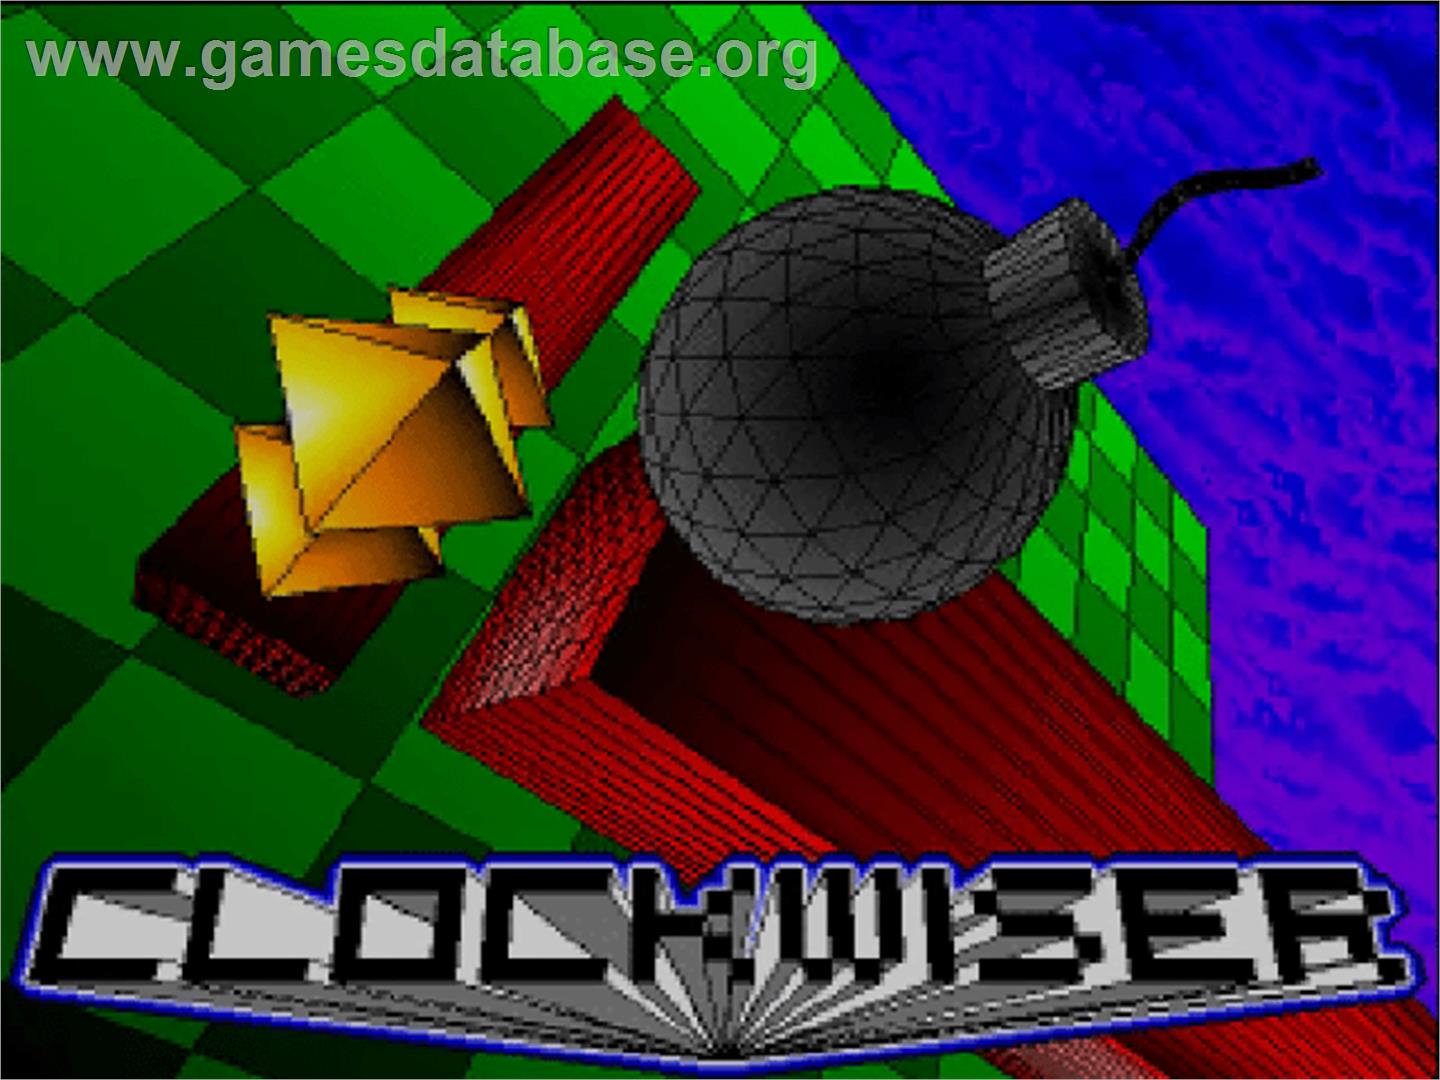 Clockwiser: Time is Running Out... - Commodore Amiga CD32 - Artwork - Title Screen